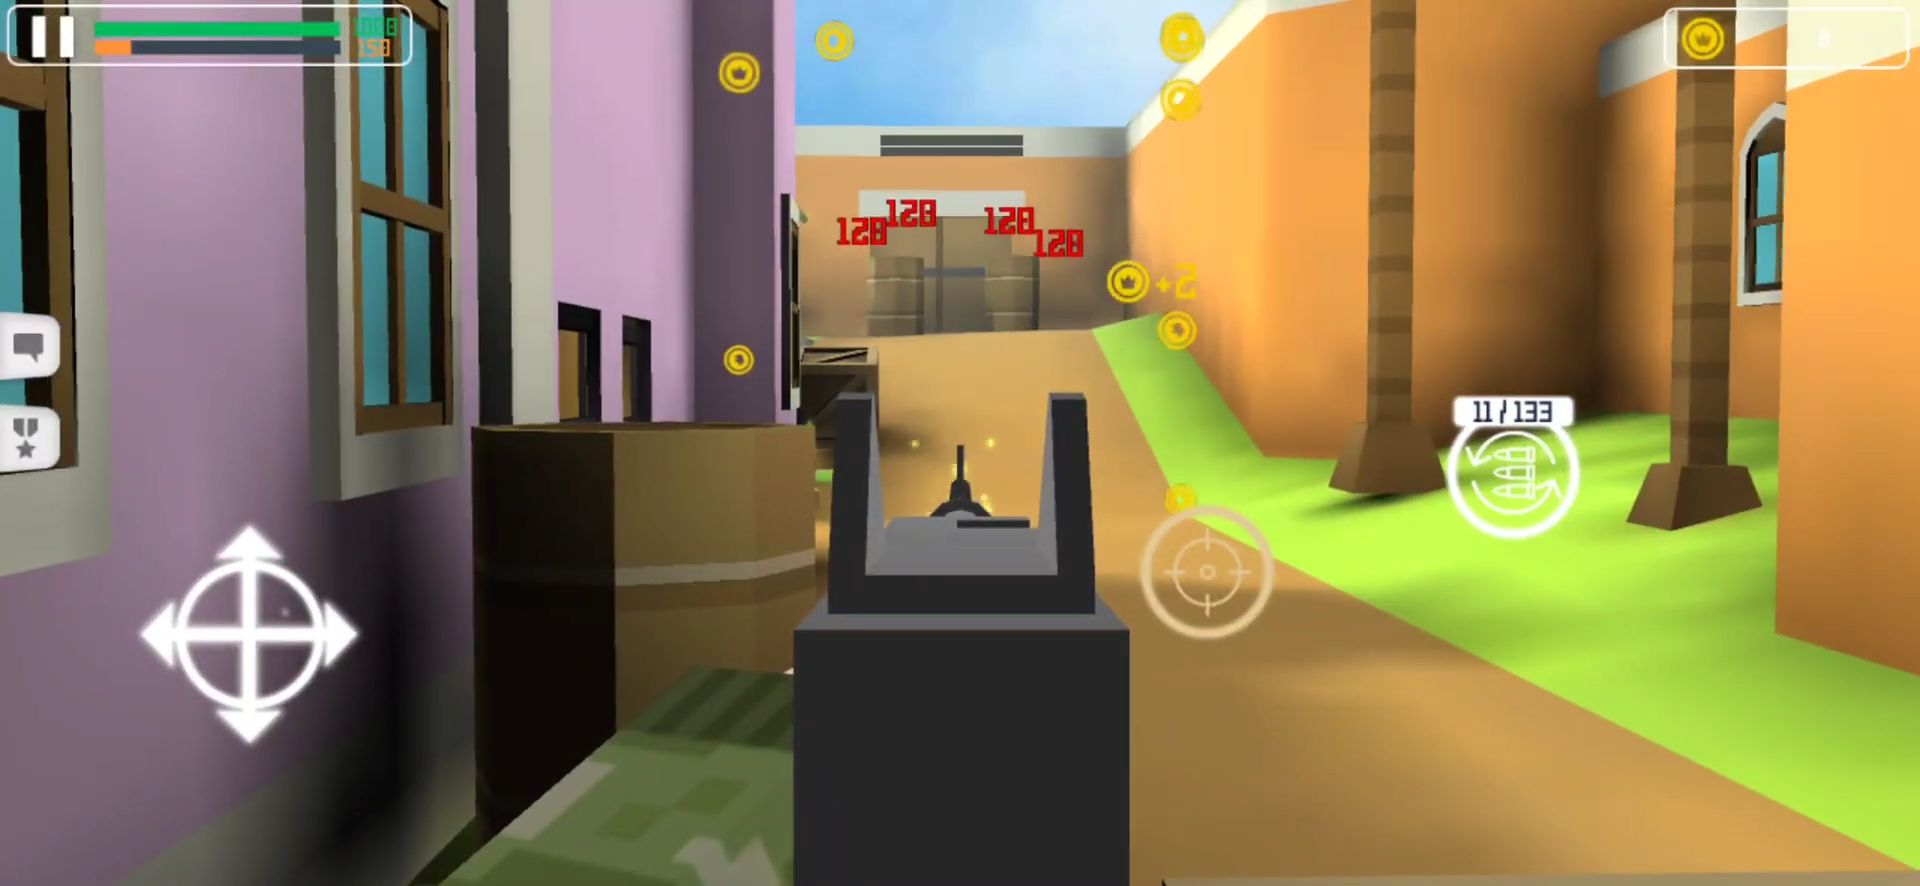 Standoff Multiplayer Download APK for Android (Free) mob